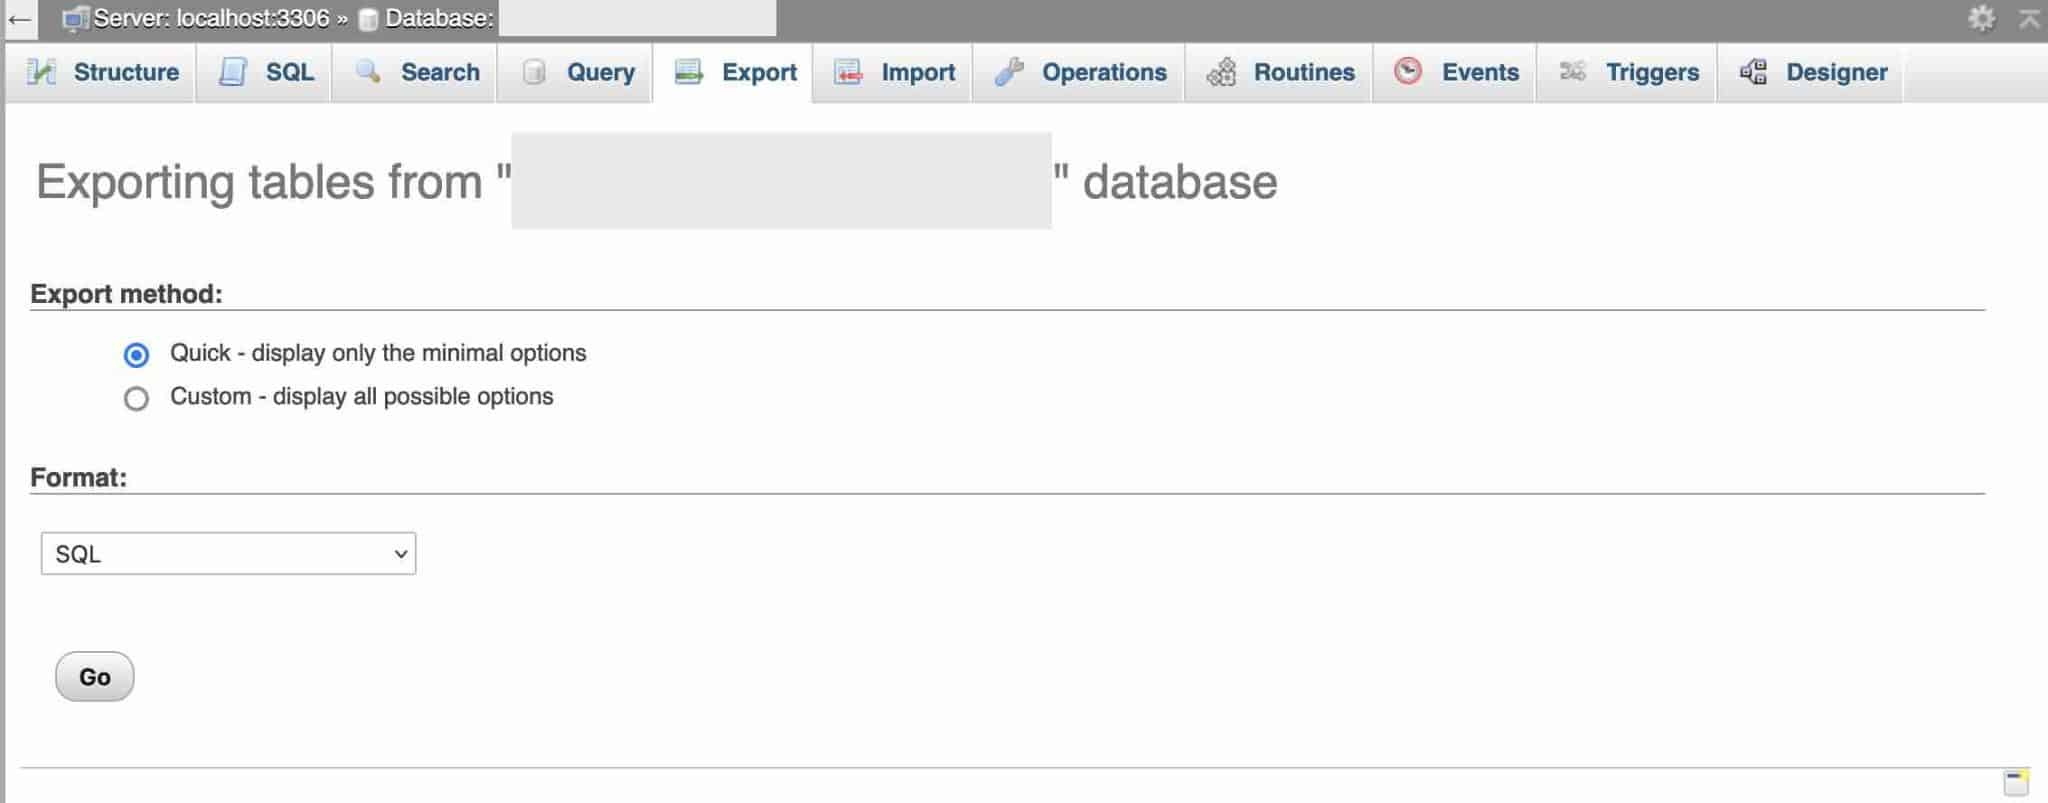 Exporting tables from the WordPress database.